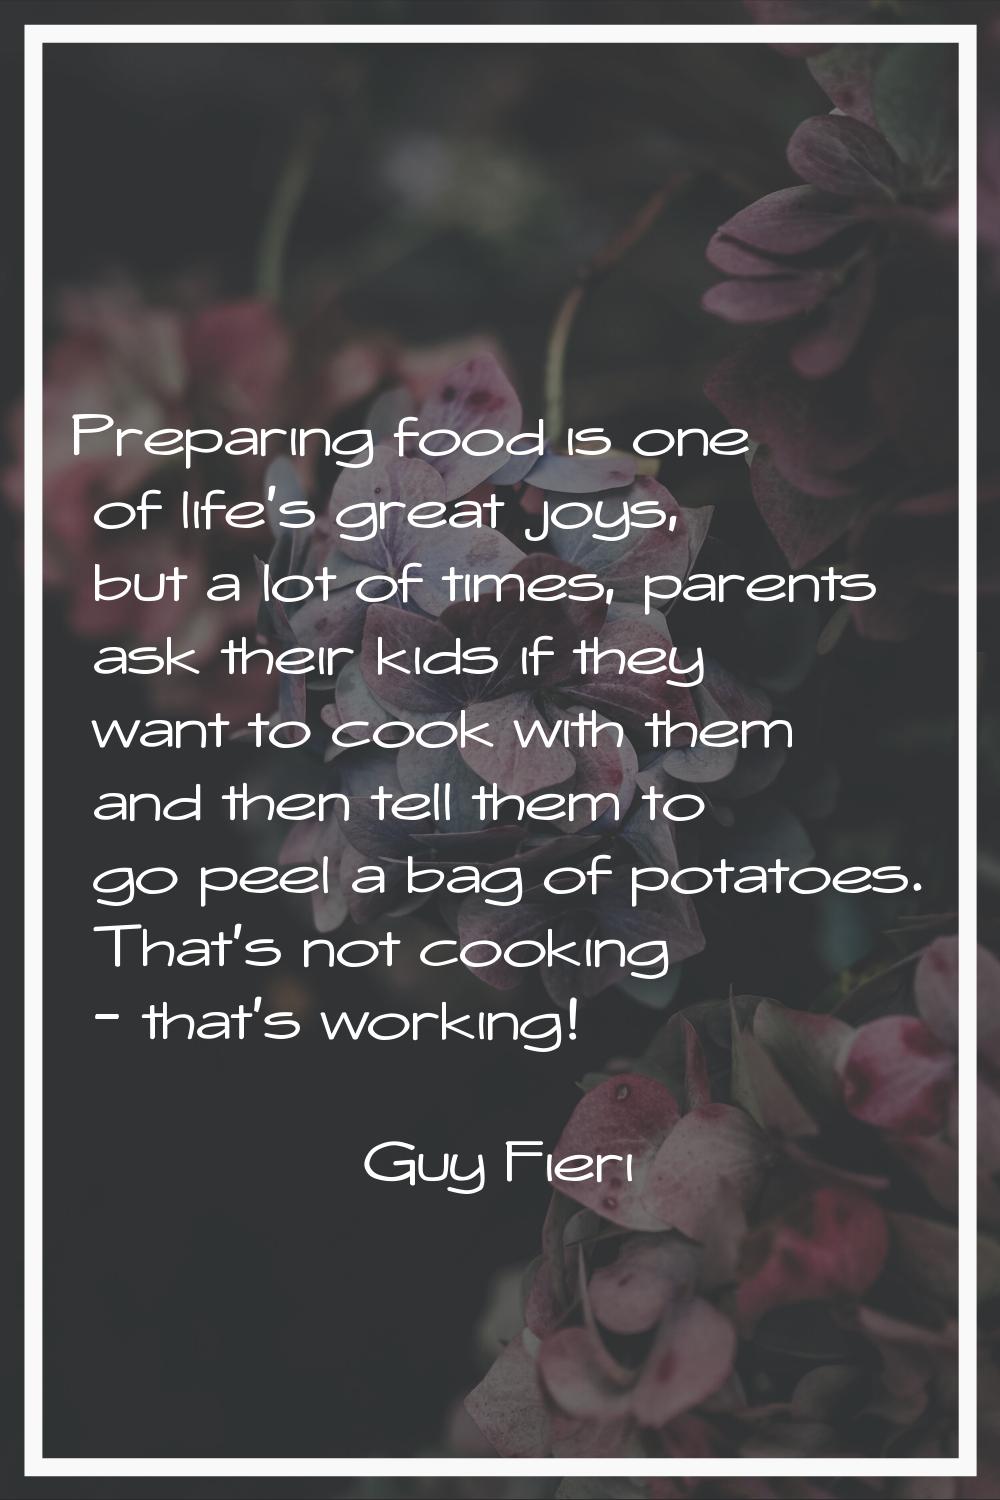 Preparing food is one of life's great joys, but a lot of times, parents ask their kids if they want